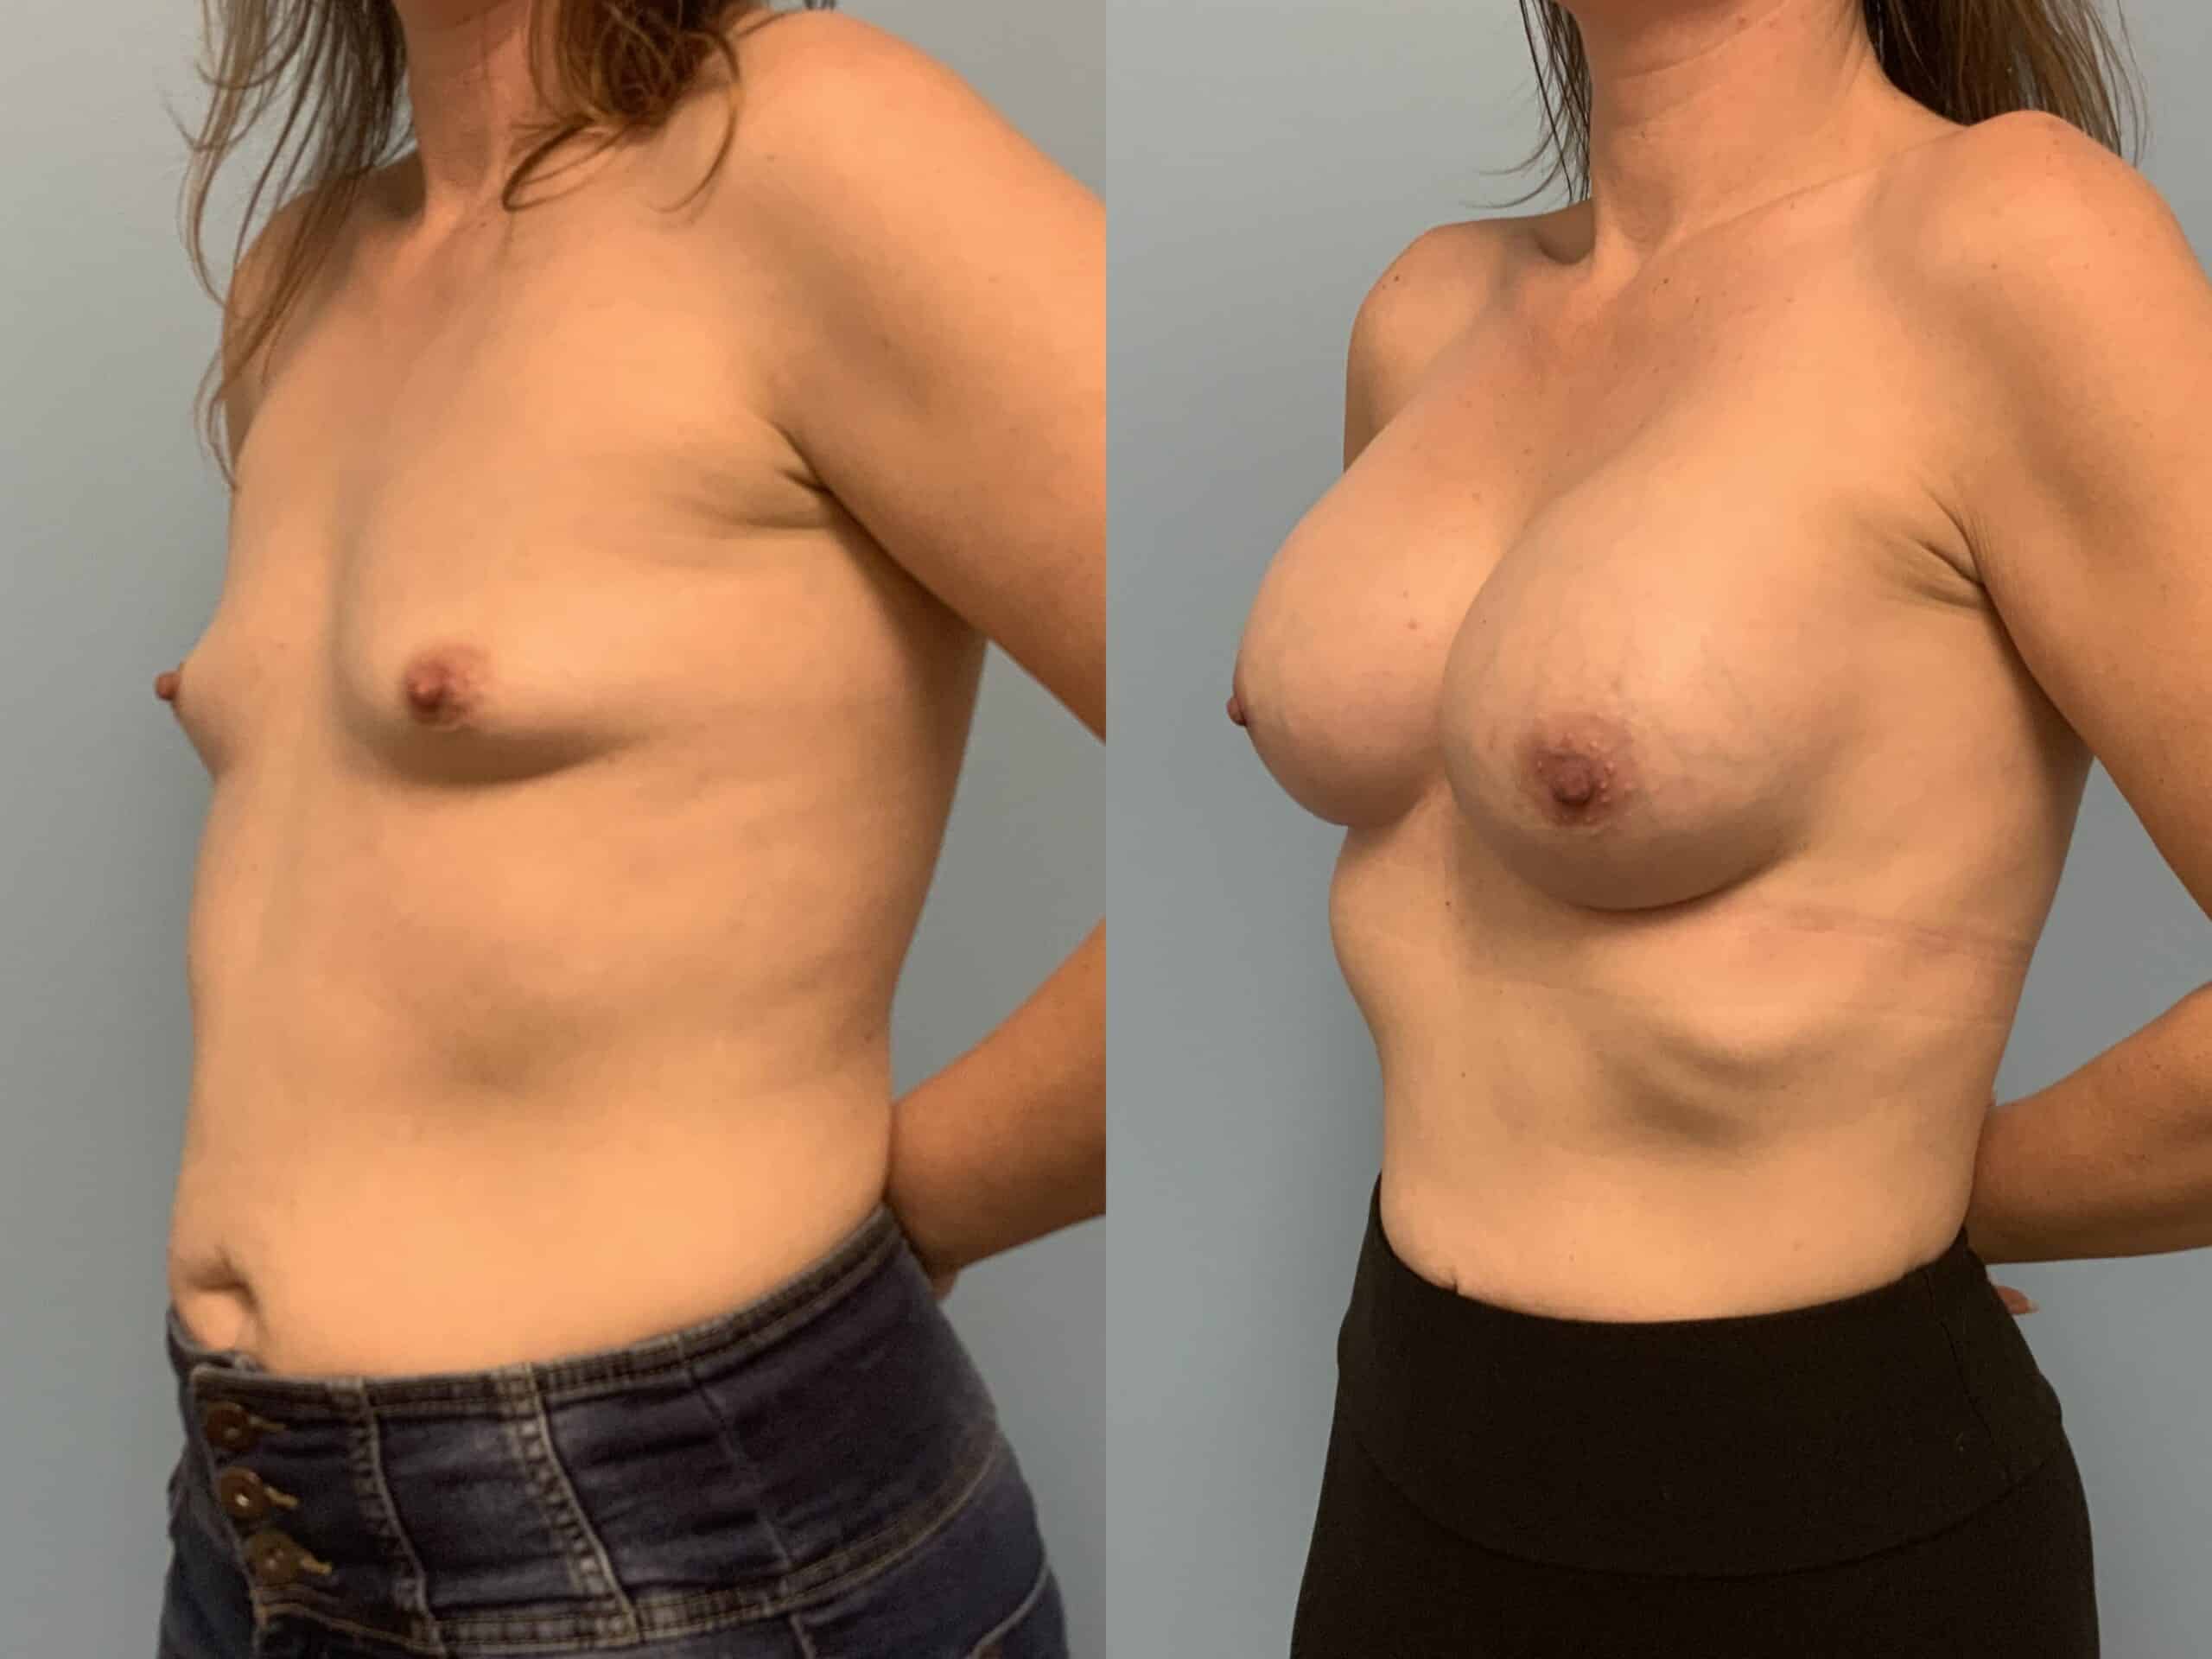 Before and after, patient 3 mo post op from Breast Augmentation and Level III Muscle Release procedure performed by Dr. Paul Vanek